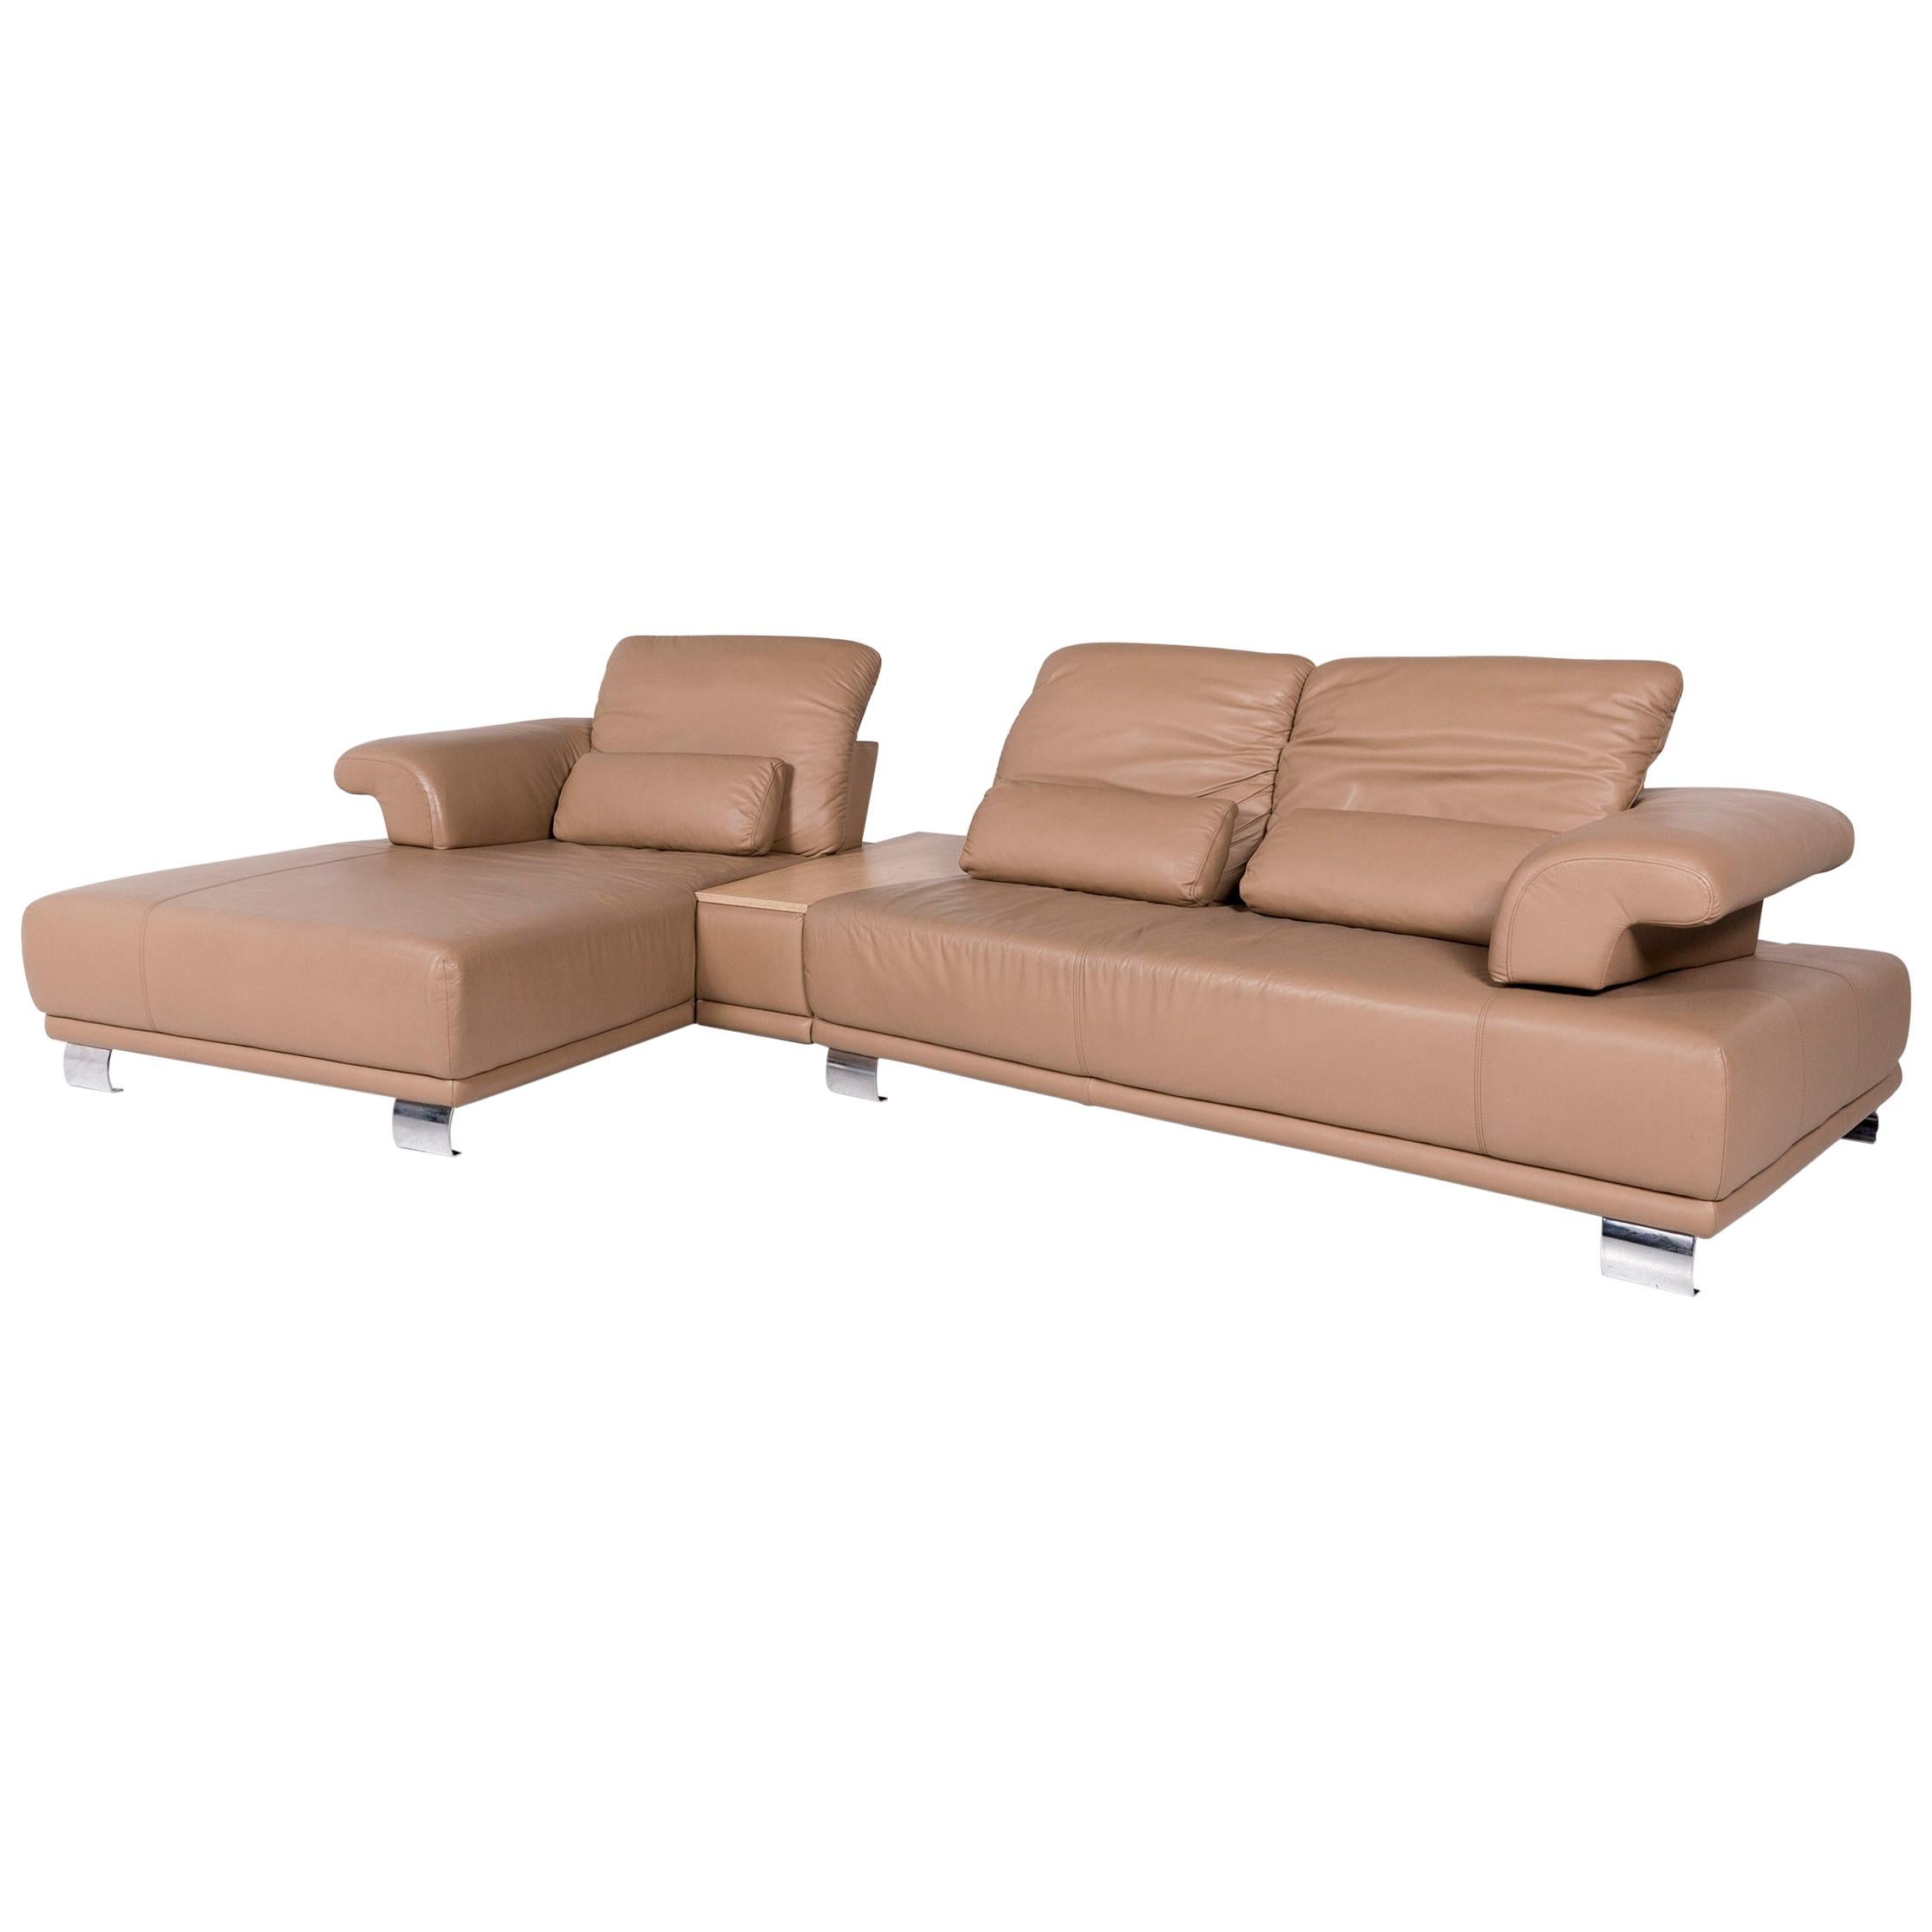 Koinor Leather Corner Sofa Beige Sofa Function Couch For Sale